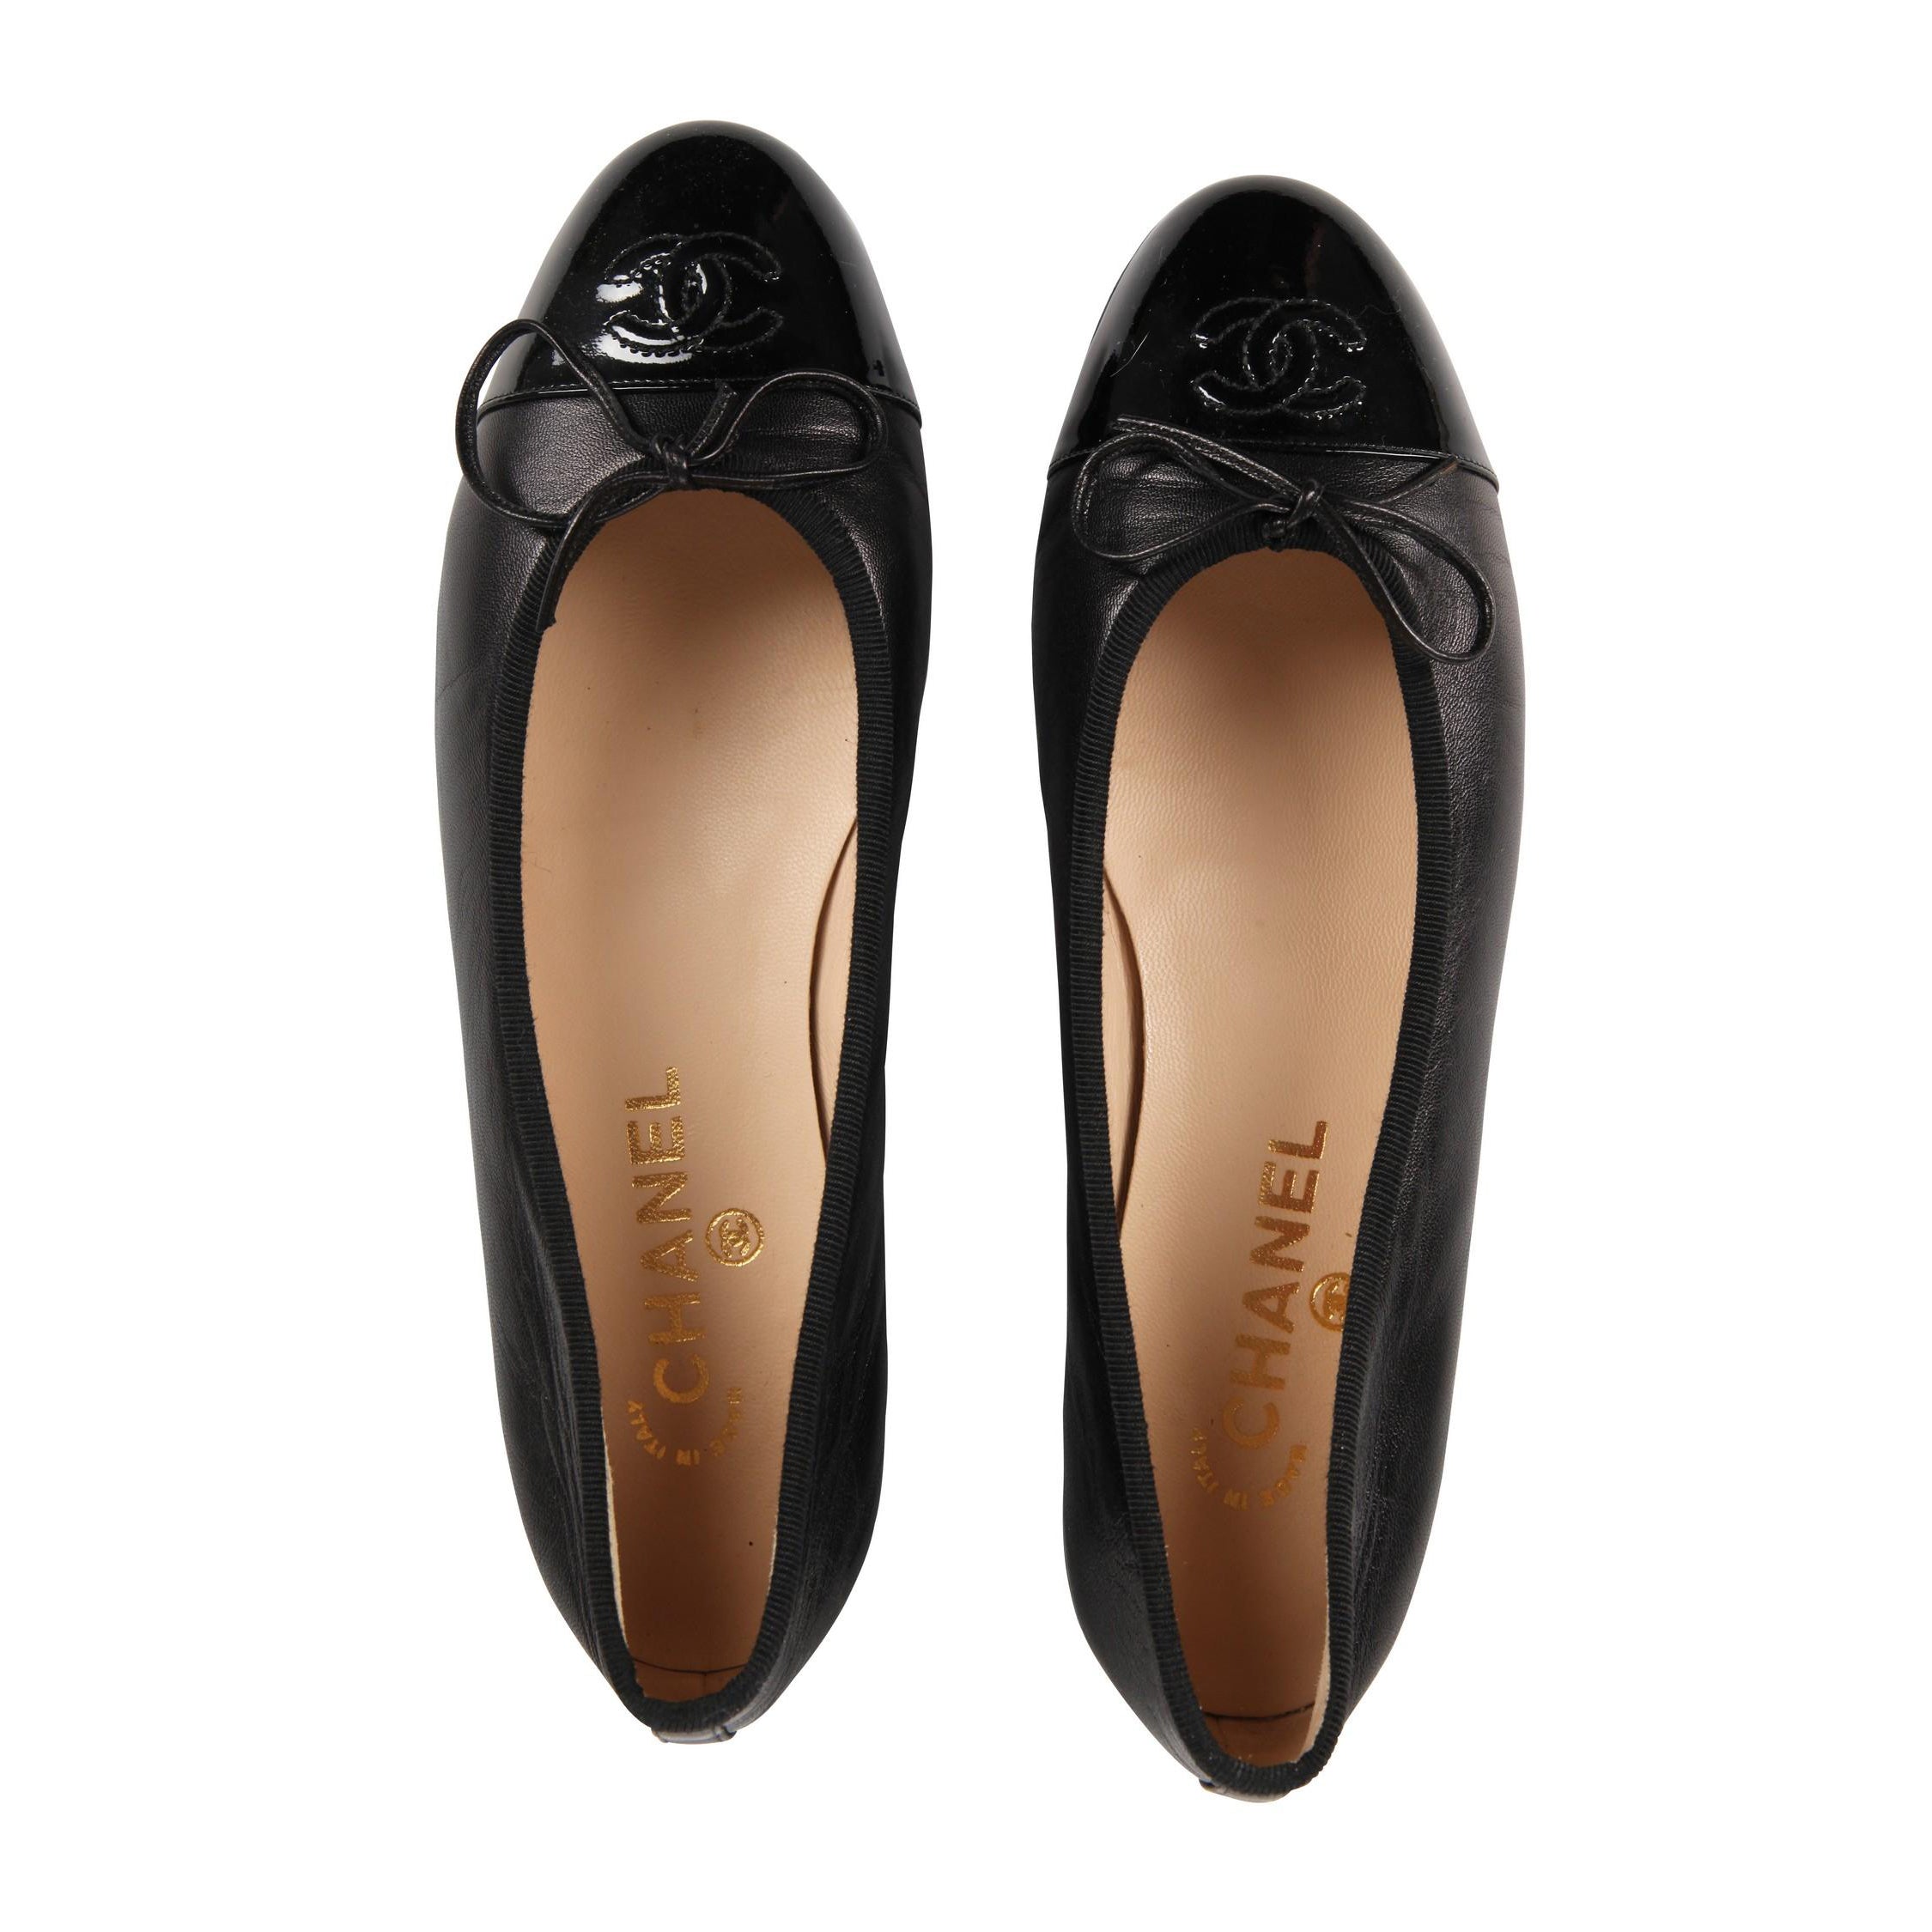 Leather ballet flats Chanel Black size 39.5 EU in Leather - 31870419